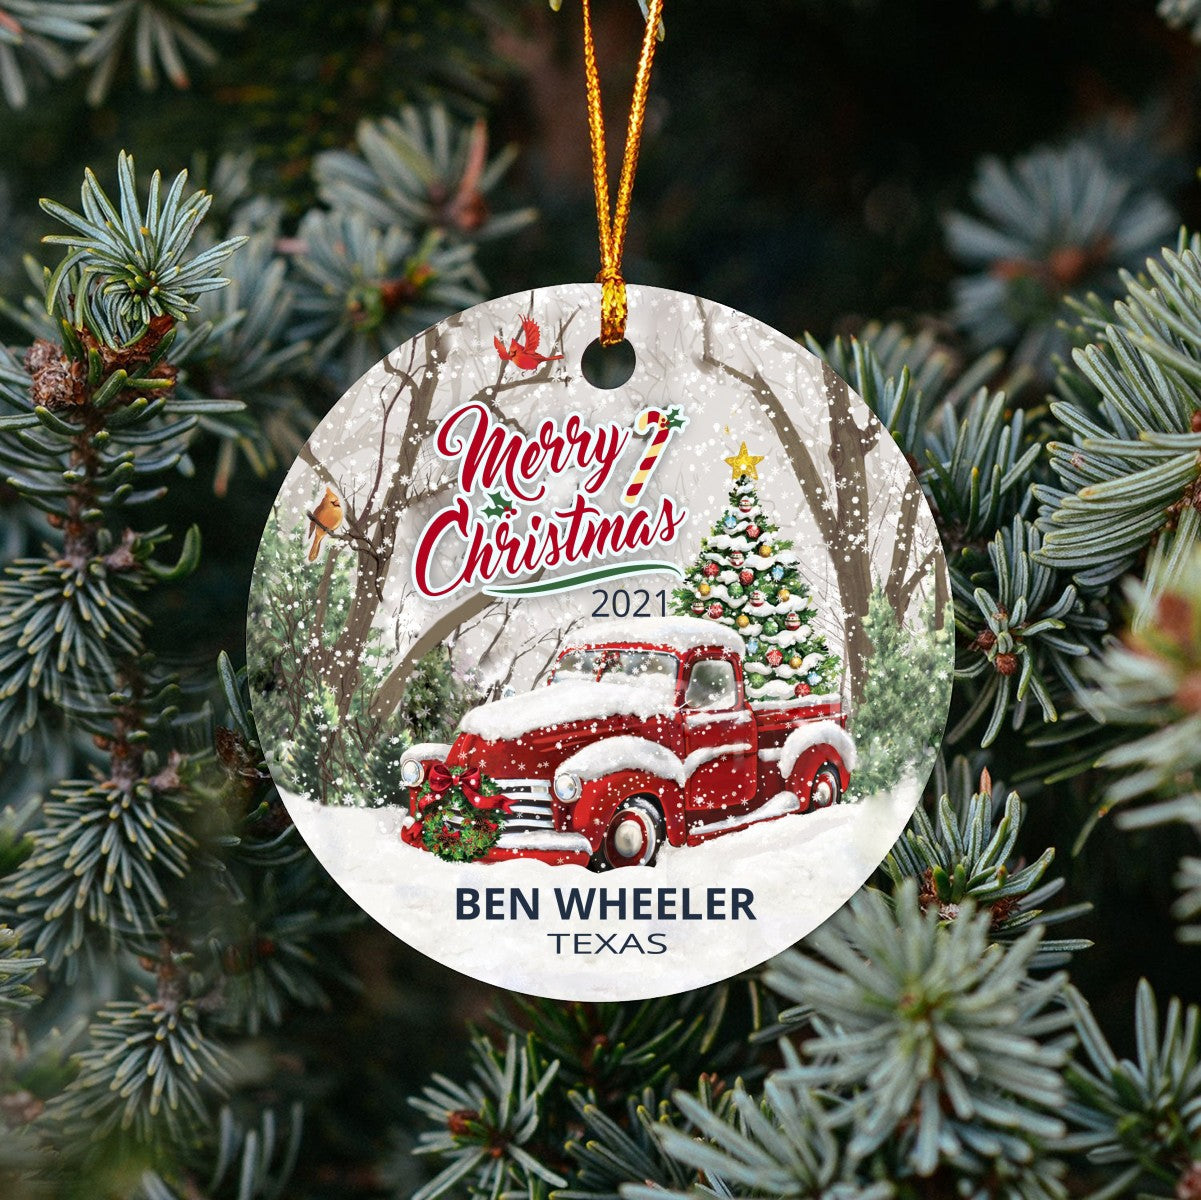 Christmas Tree Ornaments Ben Wheeler - Ornament With Name City, State Ben Wheeler Texas TX Ornament - Red Truck Xmas Ornaments 3'' Plastic Gift For Family, Friend And Housewarming